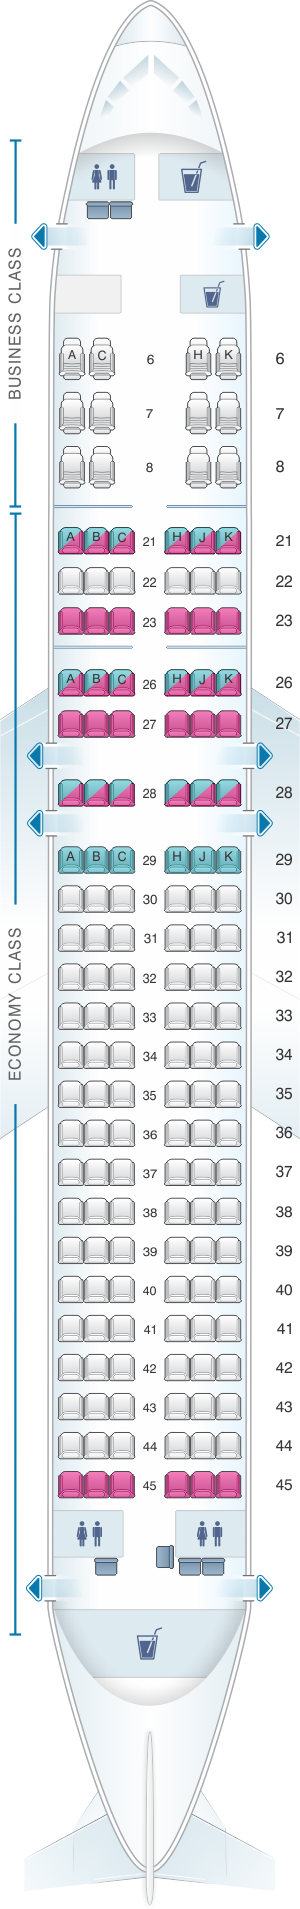 Seat Map Royal Brunei Airlines Airbus A320 Neo | SeatMaestro